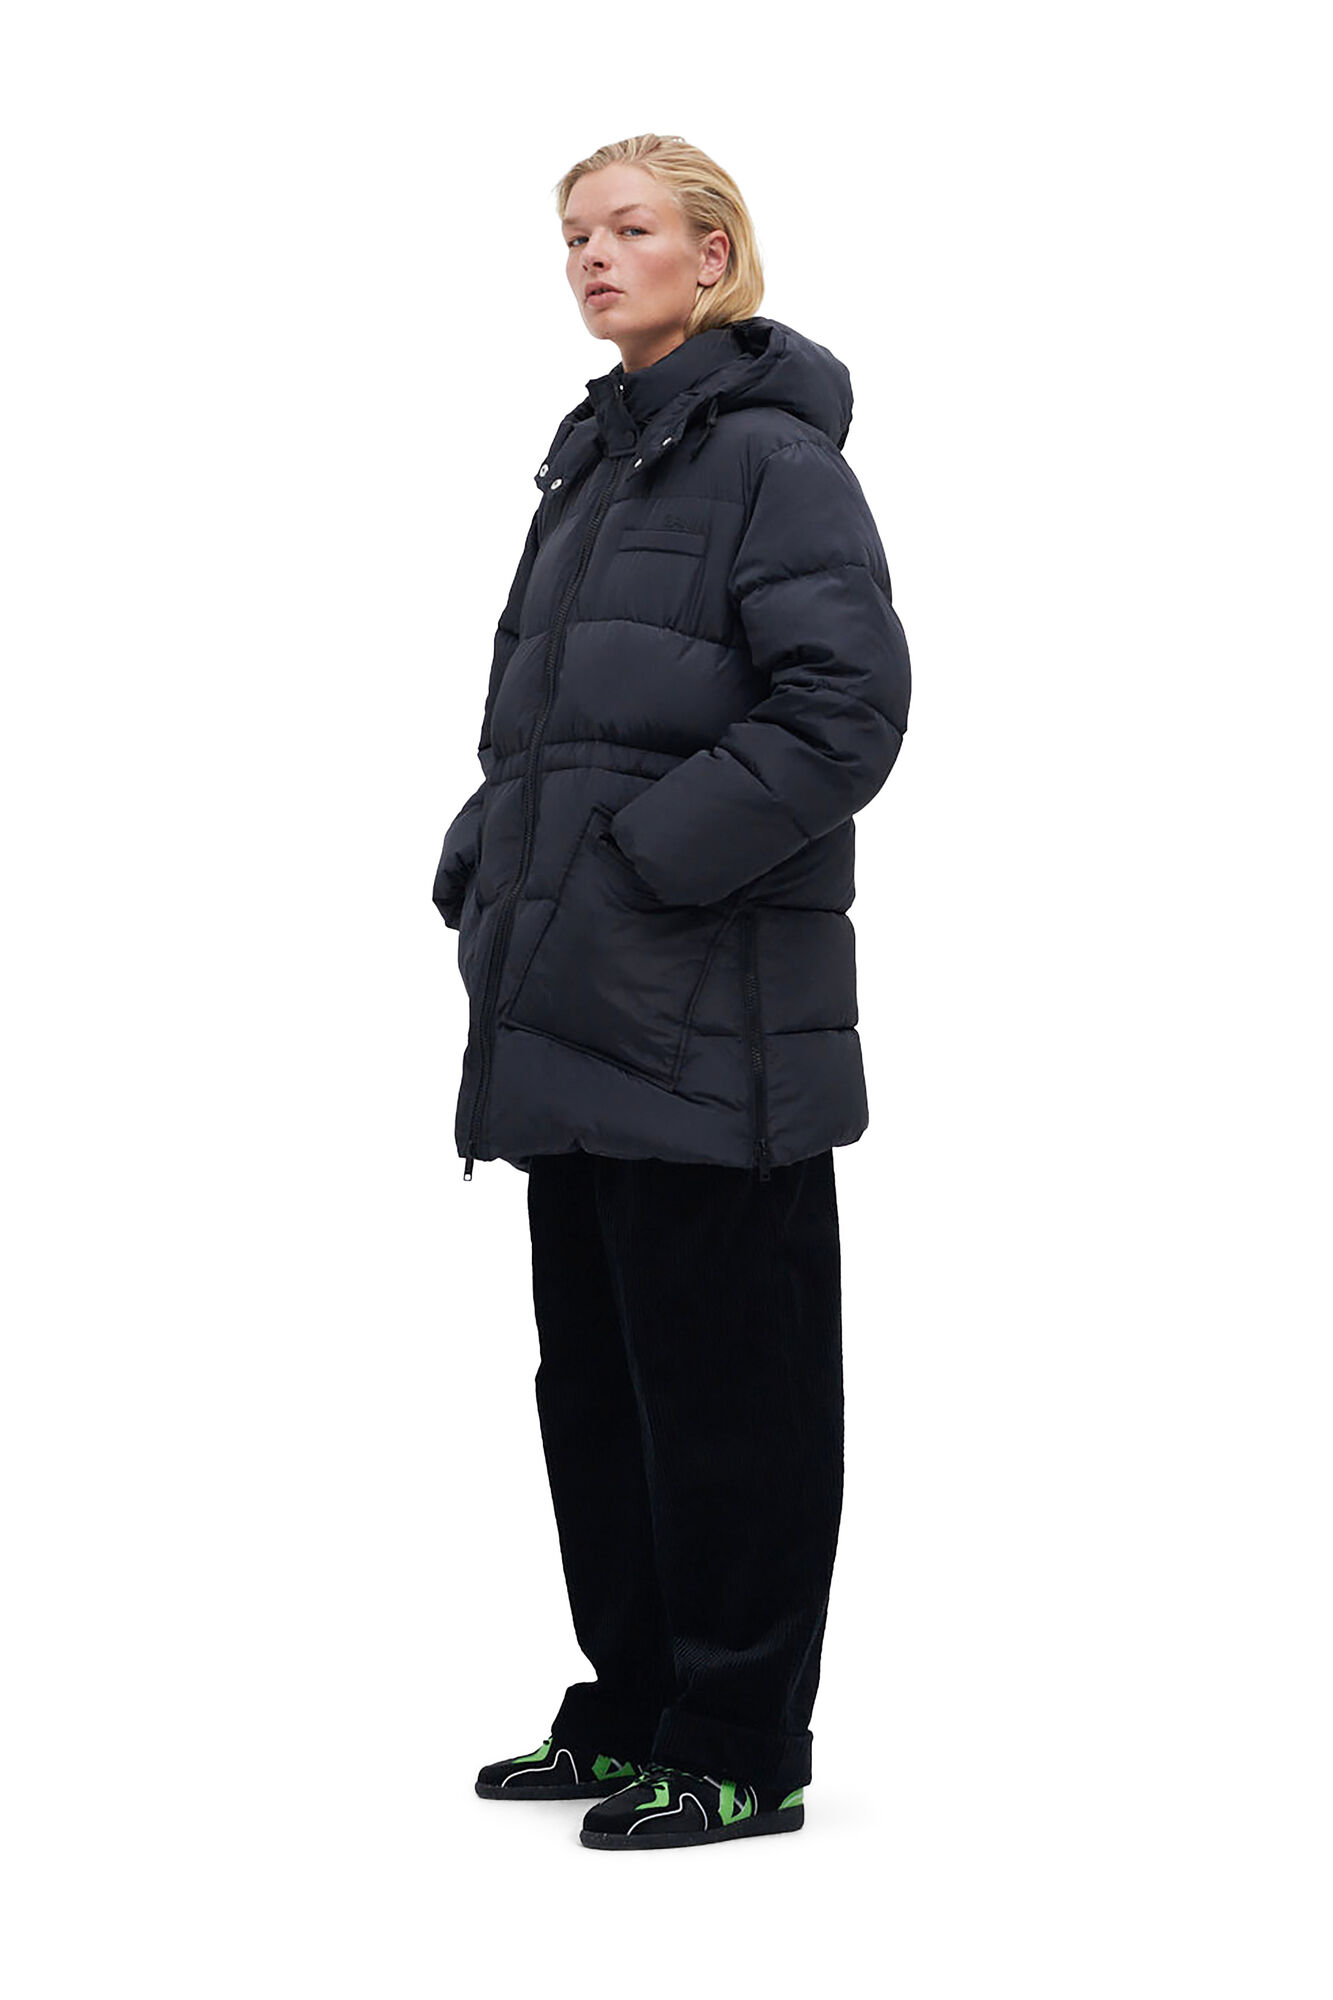 ganni.com | Oversized Midi Jacket in Puffer Style Made from recycled